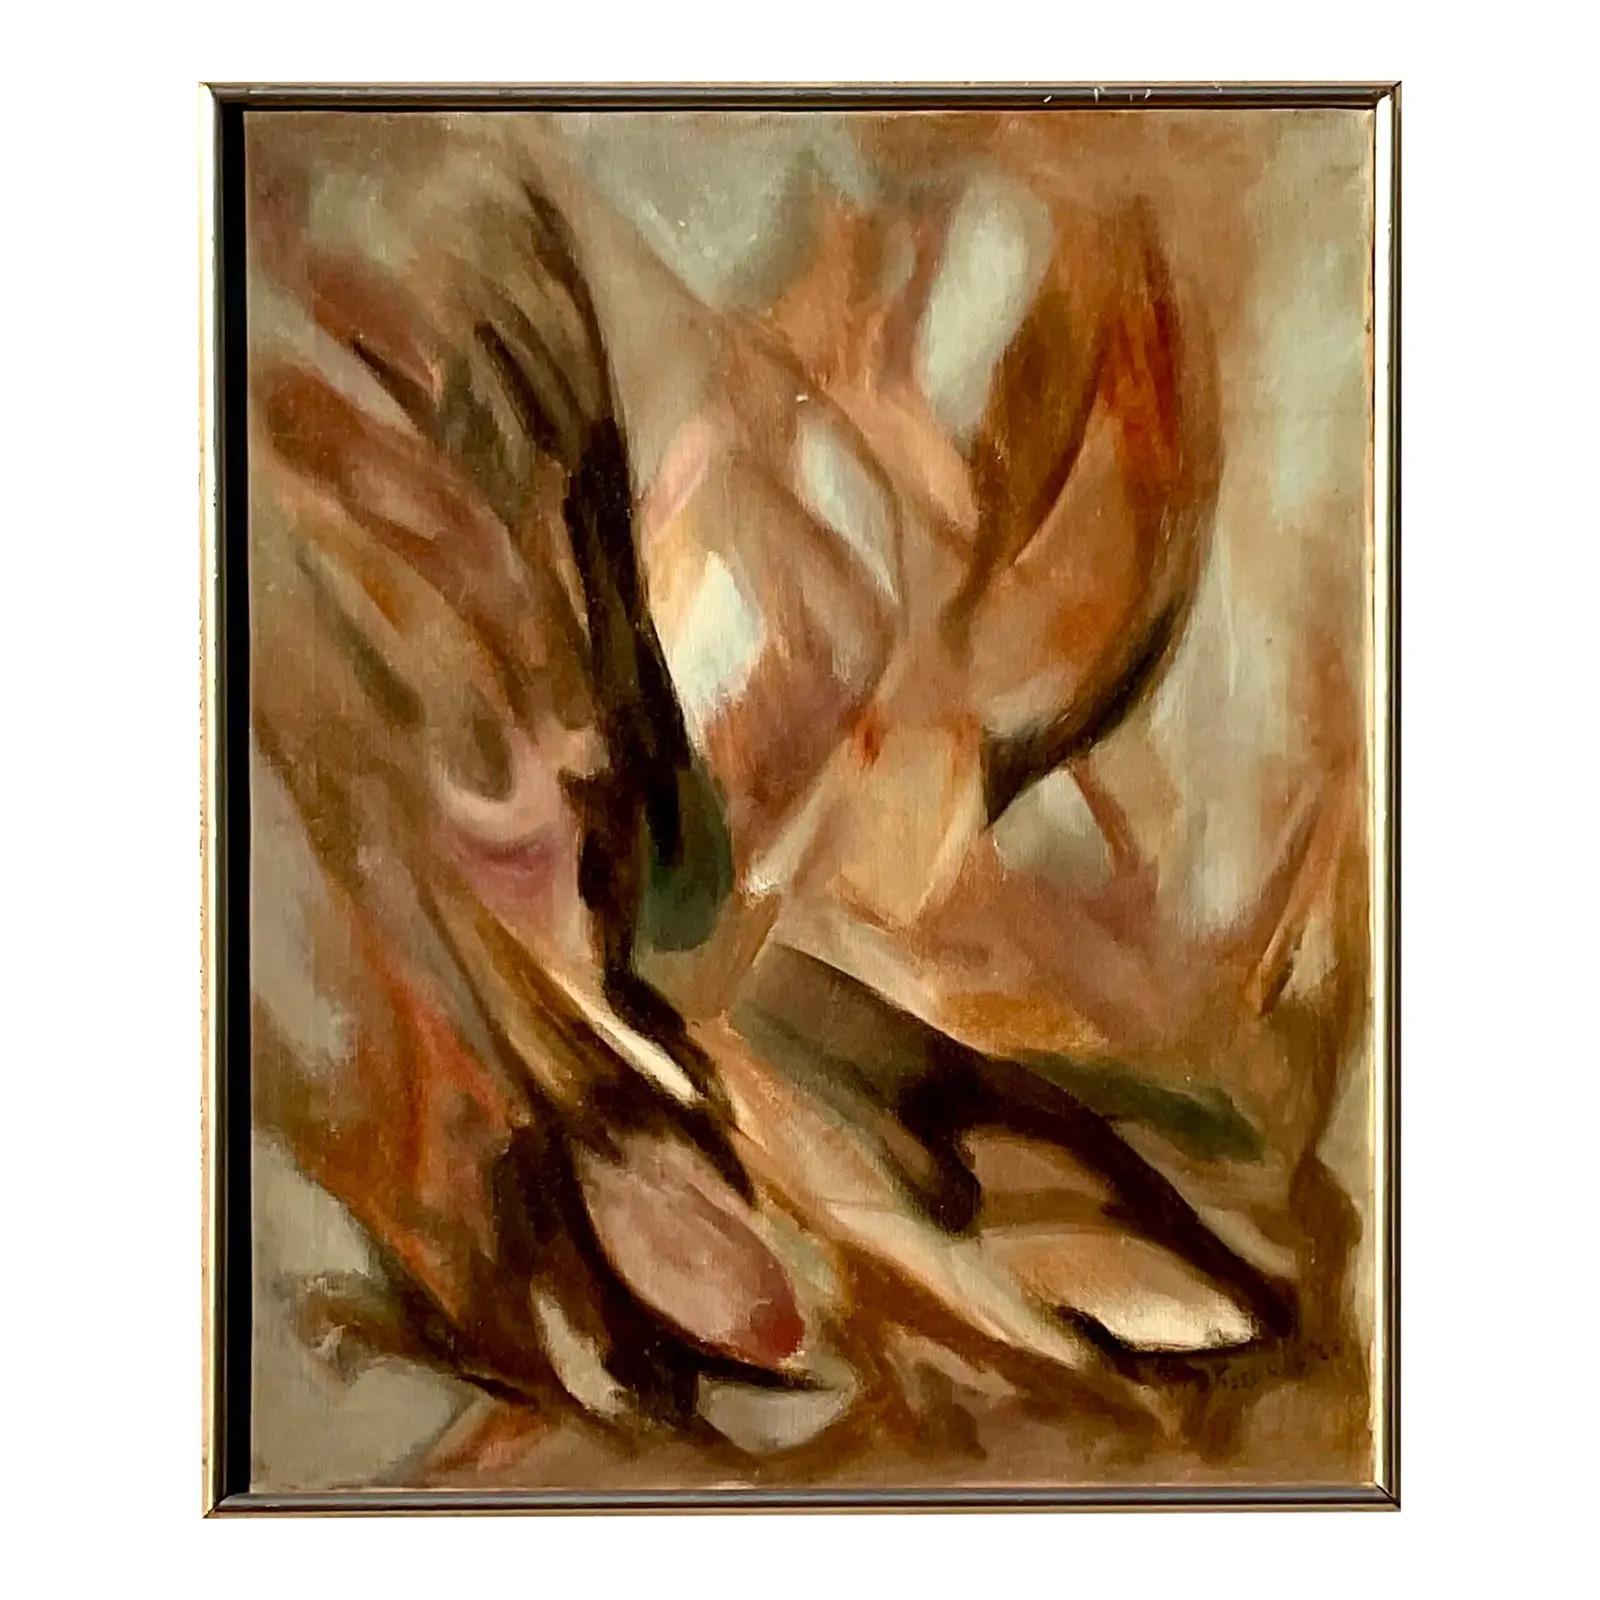 North American Vintage Mcm Abstract Original Oil Painting For Sale